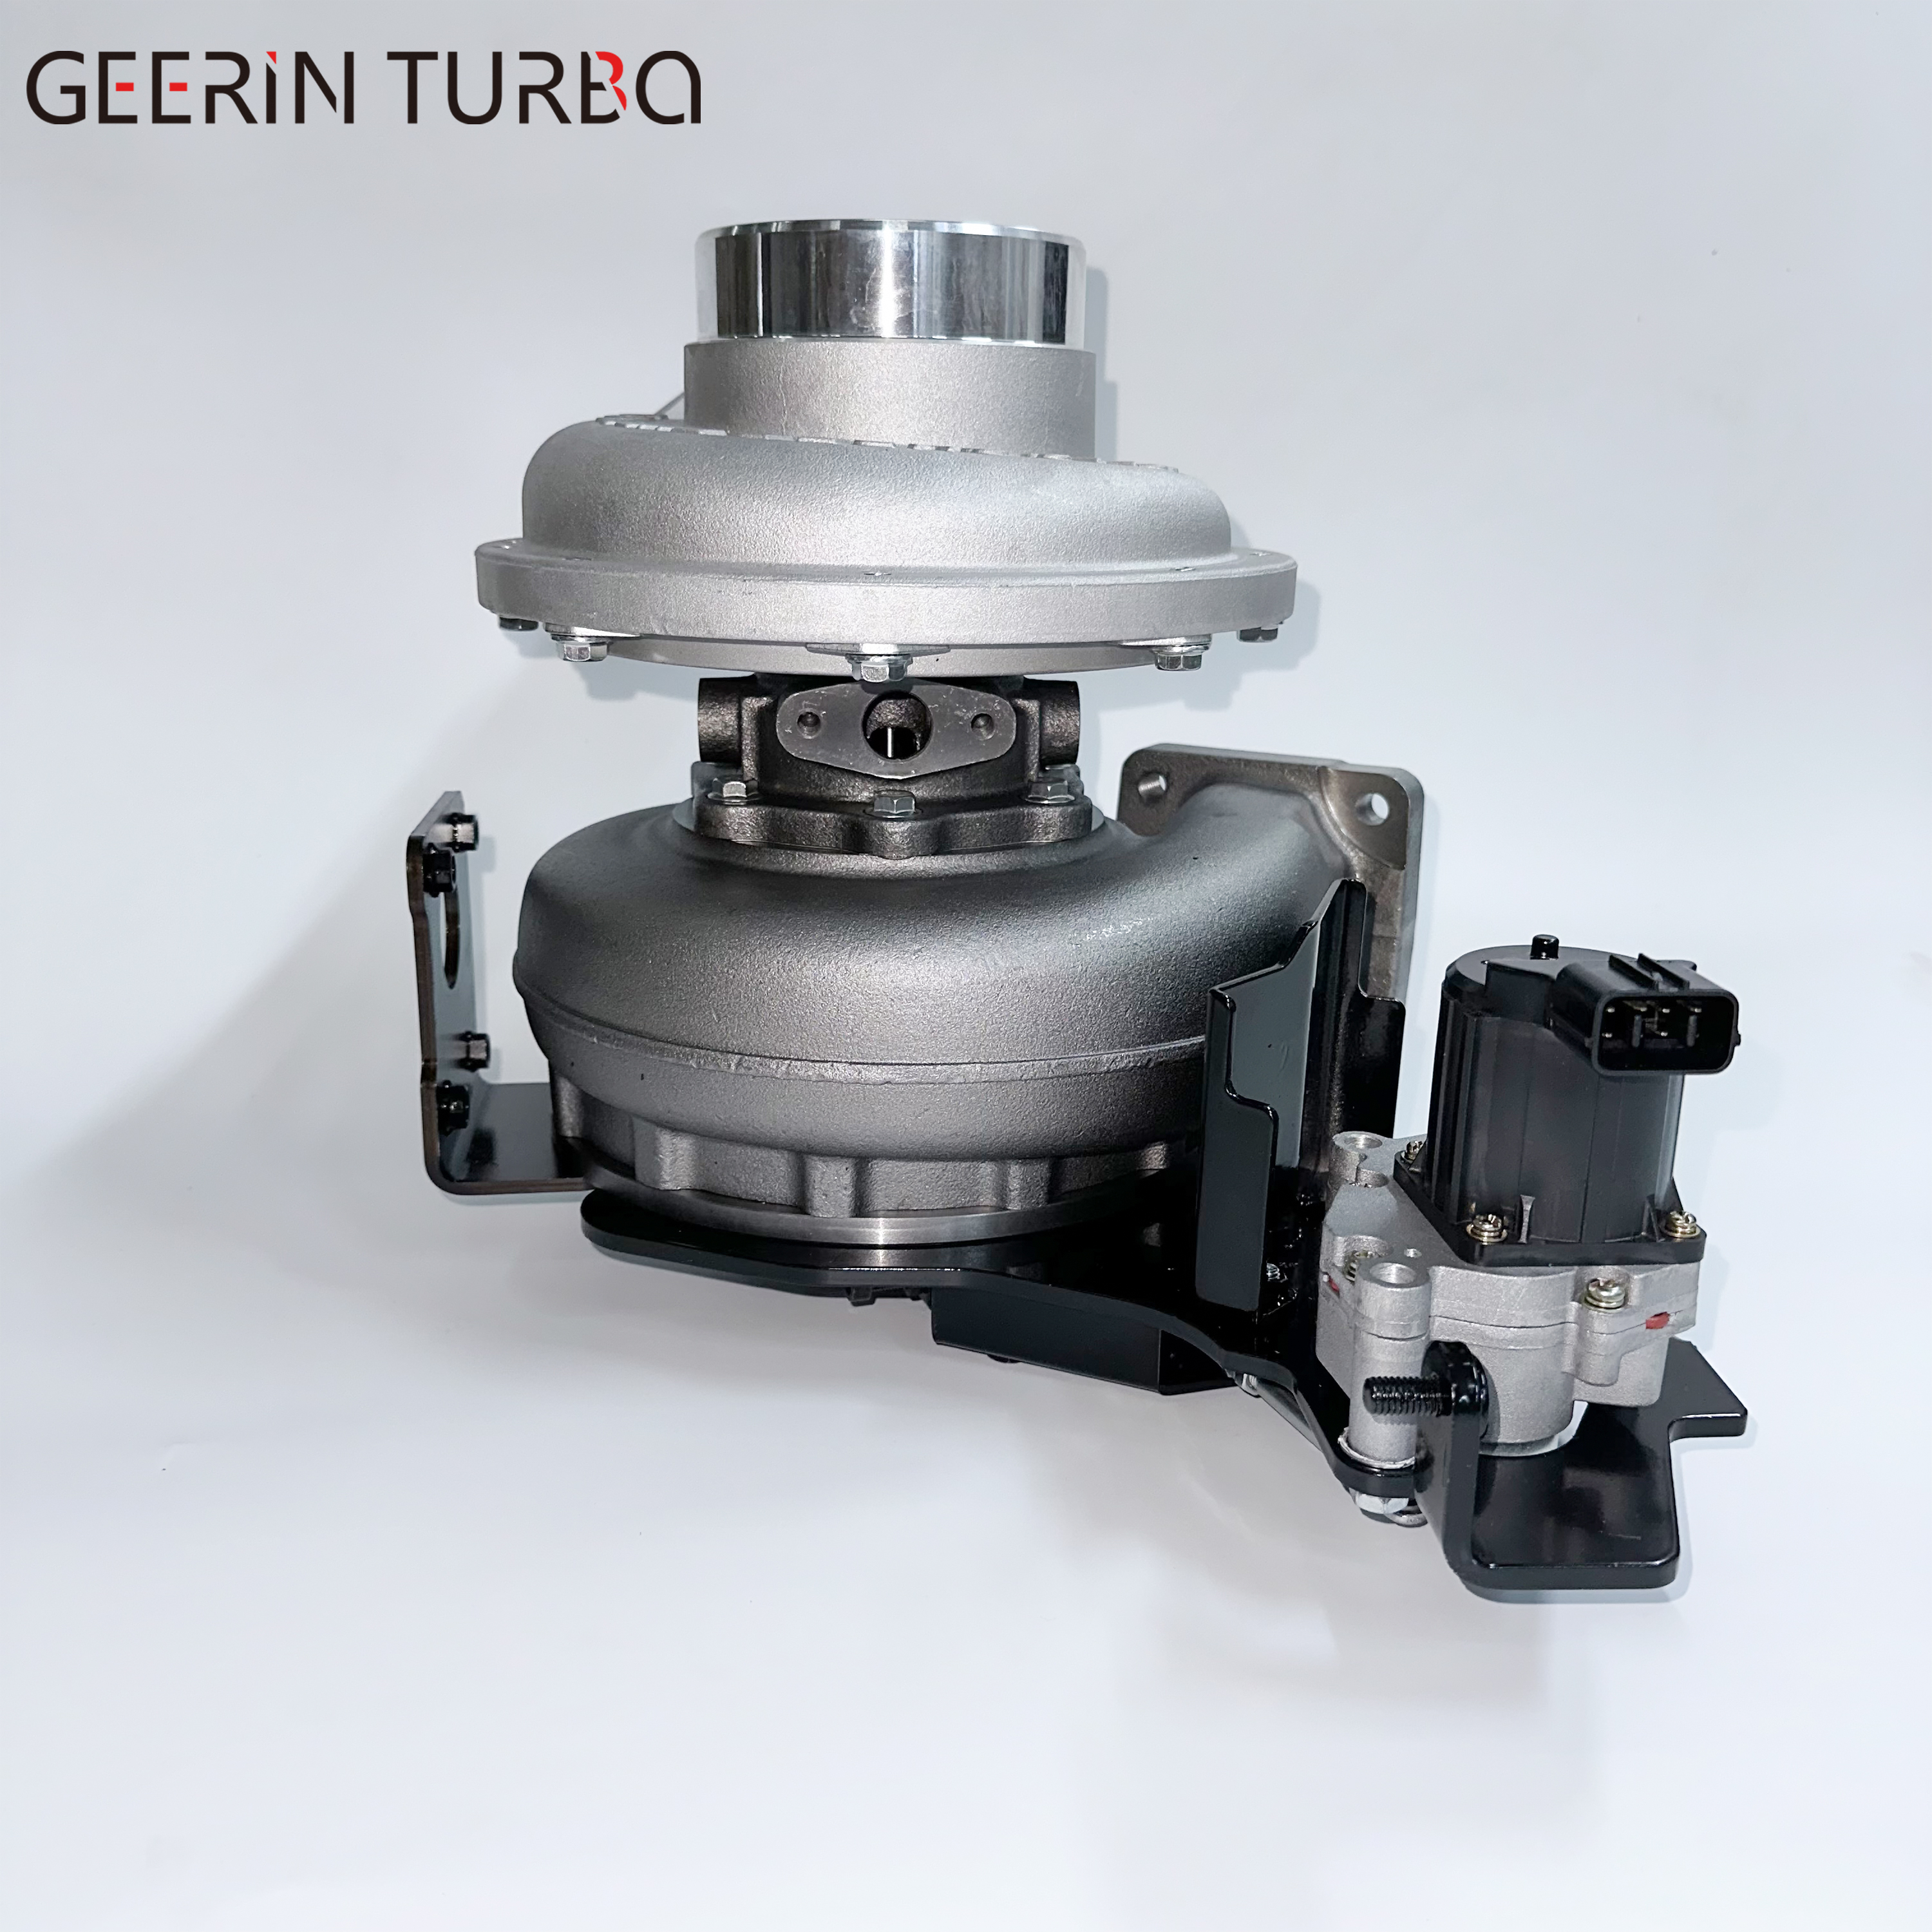 RHG8V S1760-E0022 S1760-E0M00 S1760-E0M40 E1760-E0021 S1760-E0020 Full Turbocharger For HINO Factory